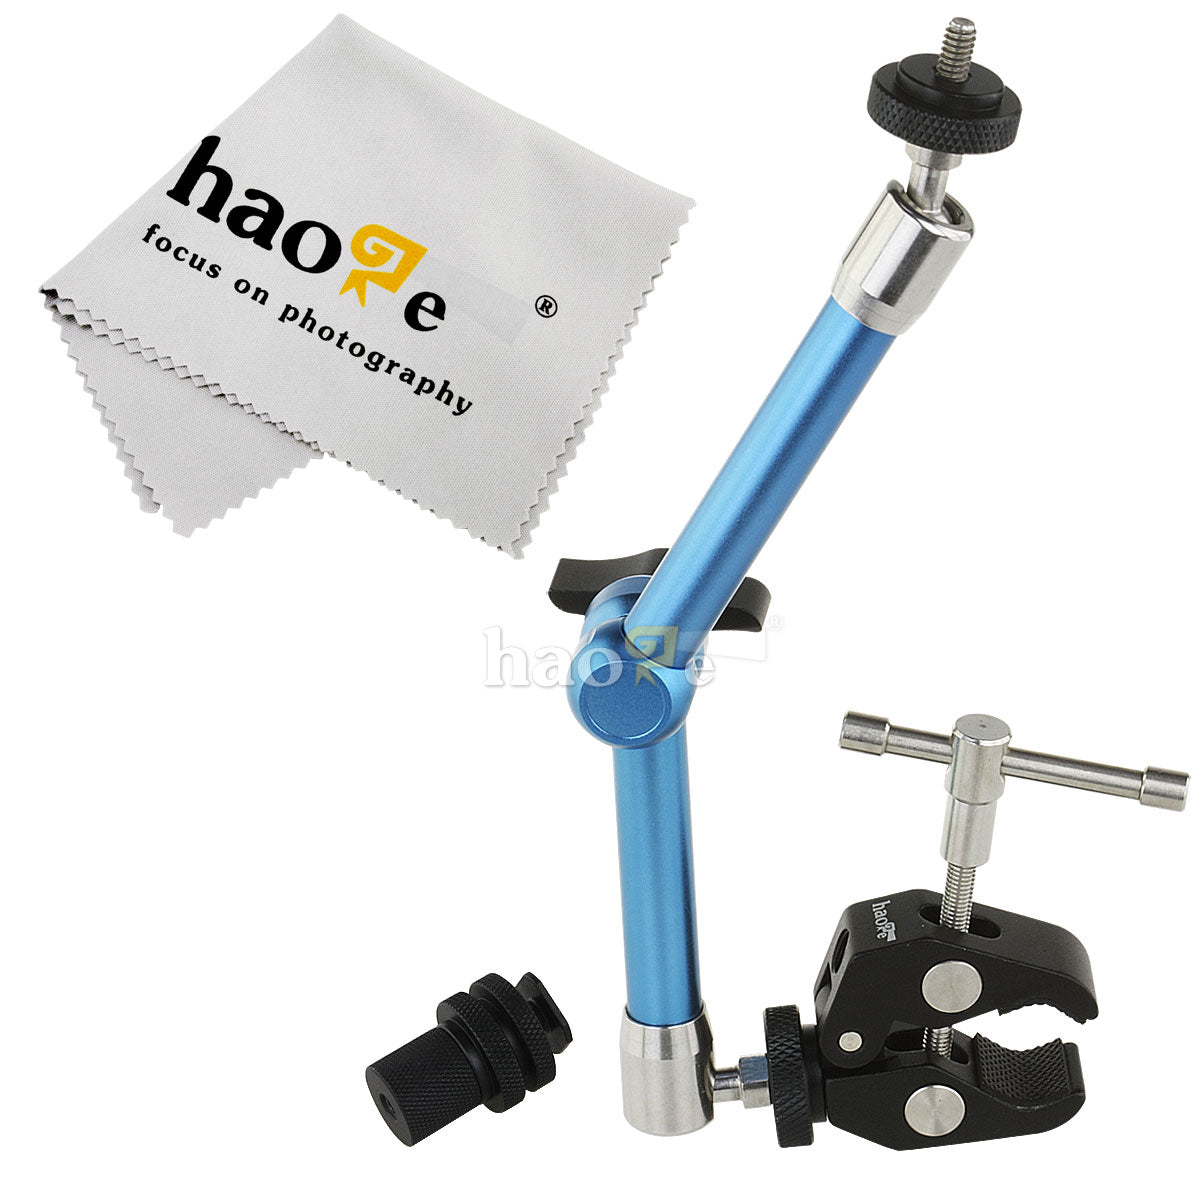 Haoge 11 inch Stainless Steel Articulating Friction Magic Arm with Large Clamp Crab Pliers Clip for HDMI LCD Monitor LED Light DSLR Camera Video Tripod Blue